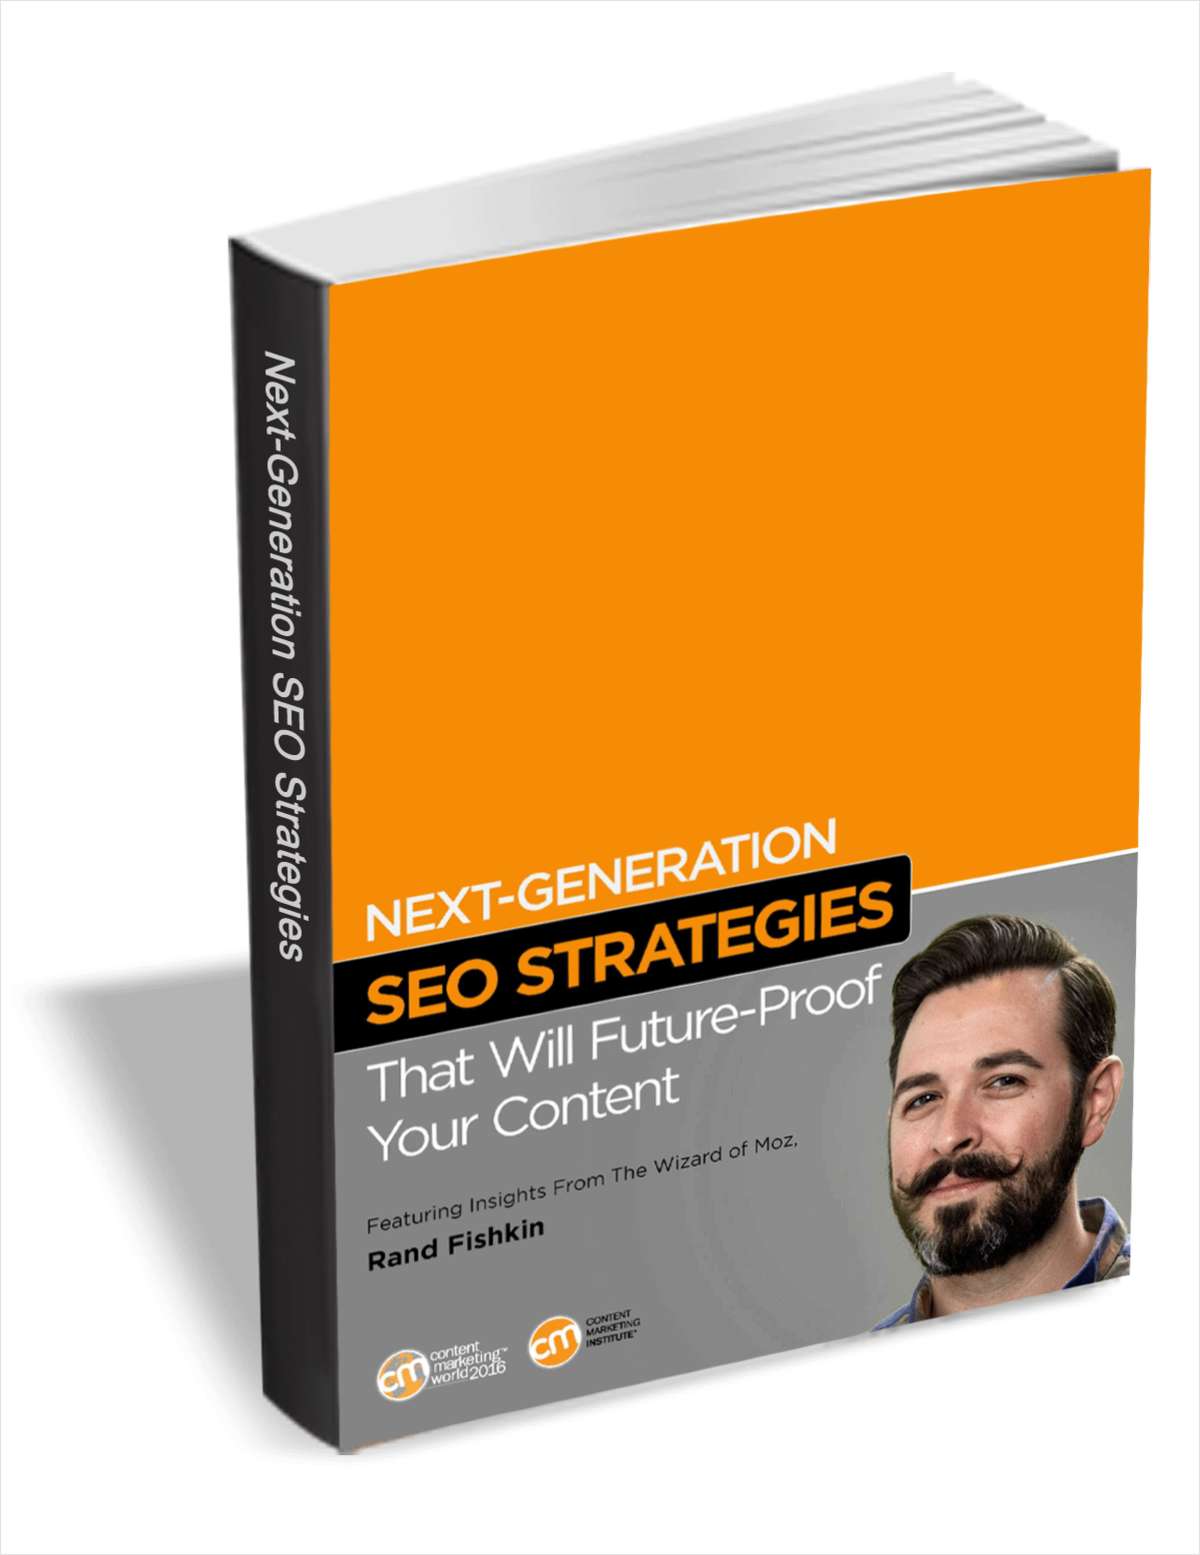 Next-Generation SEO Strategies That Will Future-Proof Your Content